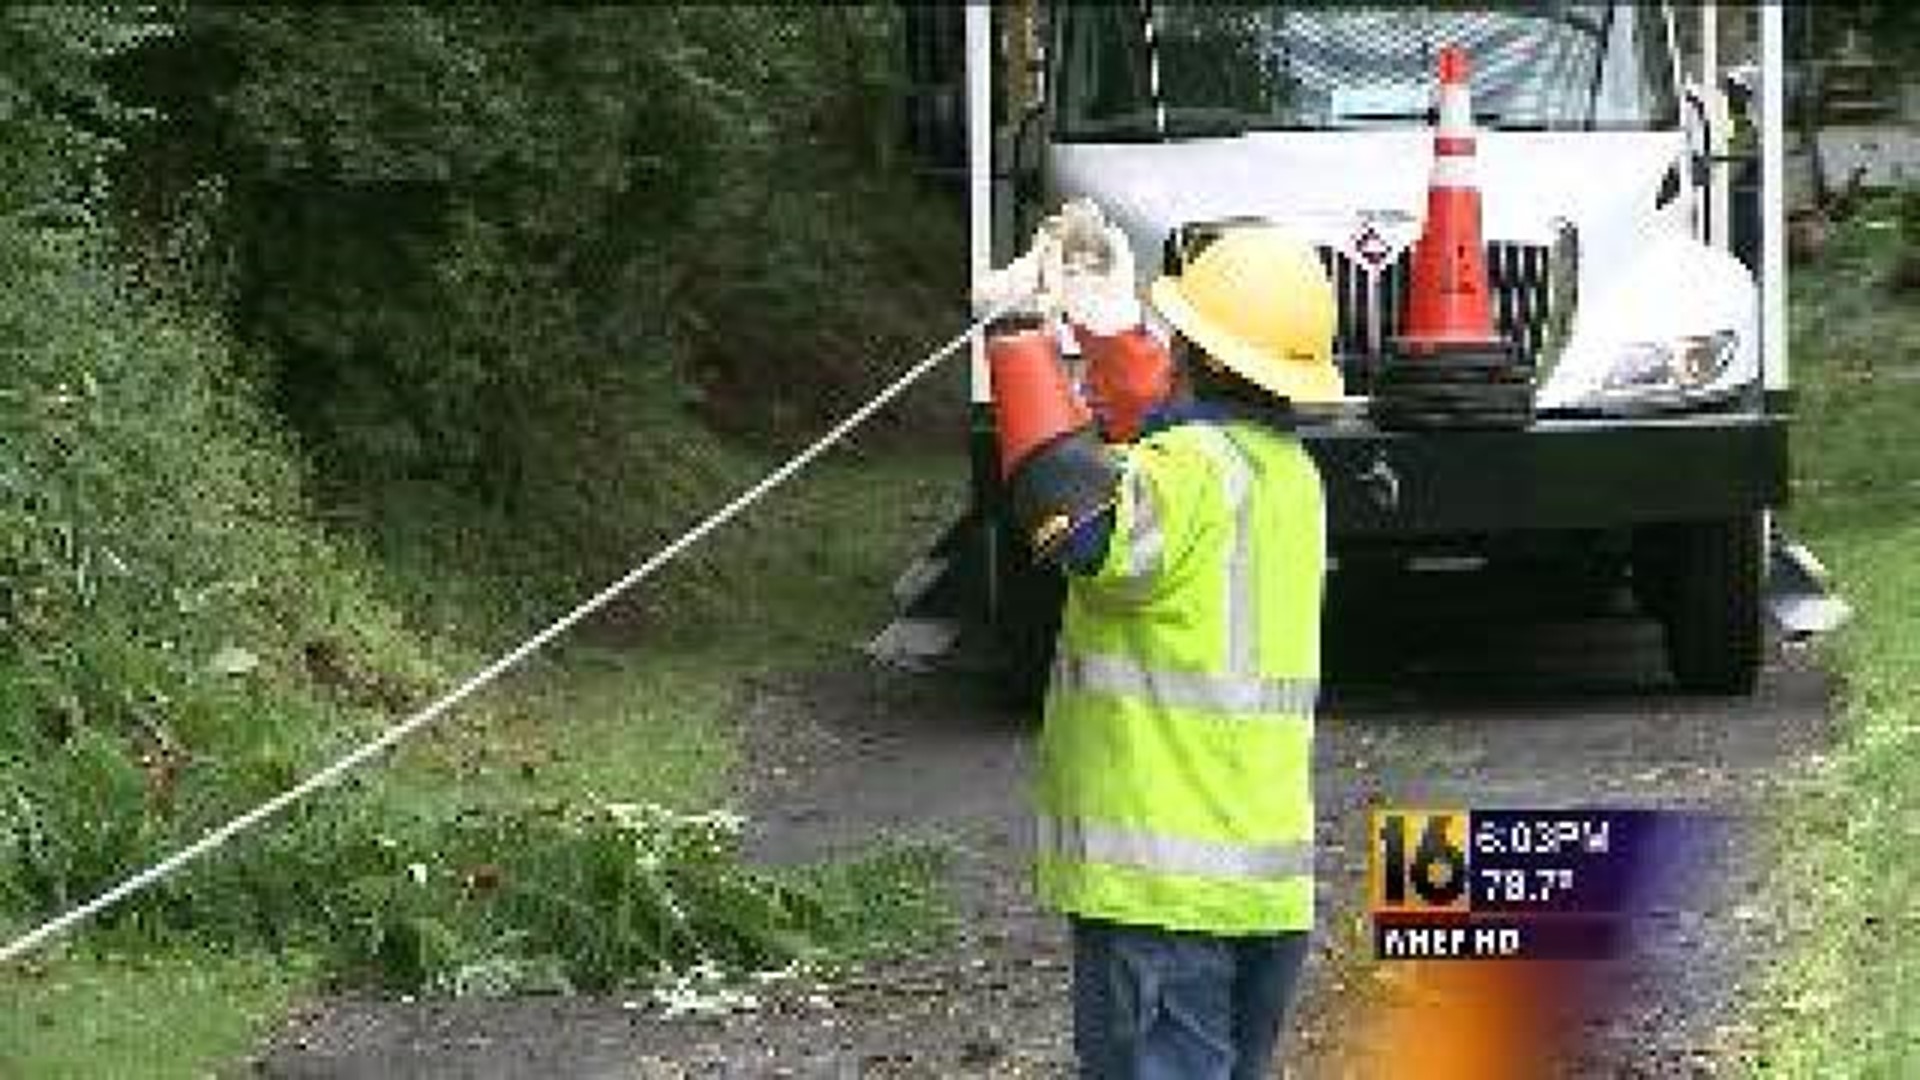 Storm Damage and Cleanup In Luzerne County